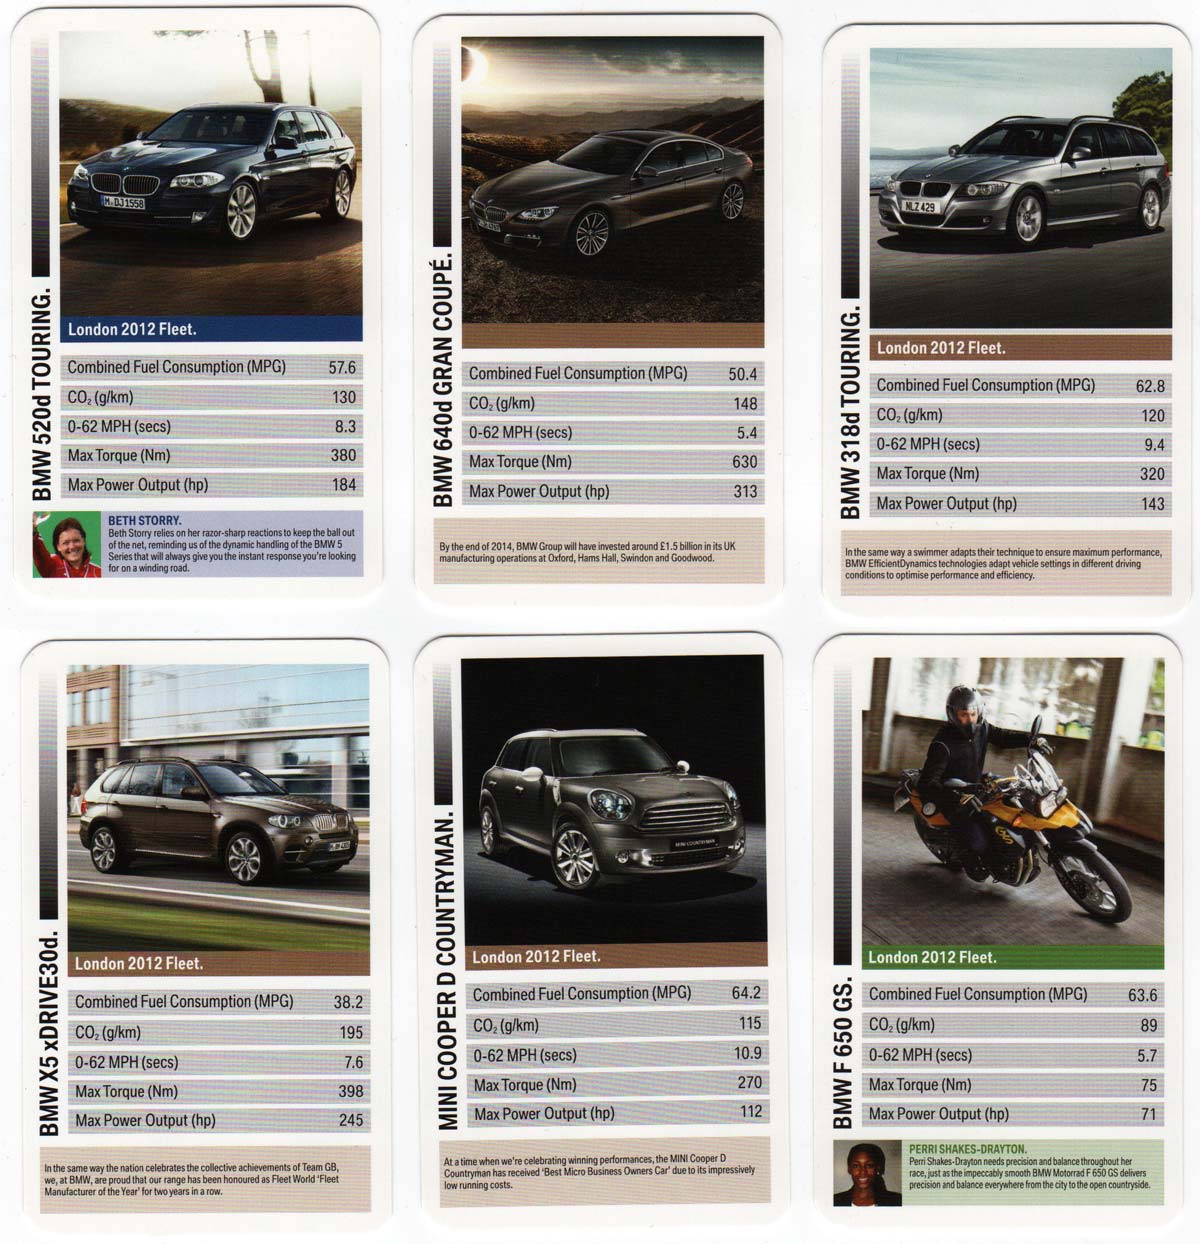 BMW Promo Top Trumps produced as promotion for the London 2012 Olympic Games